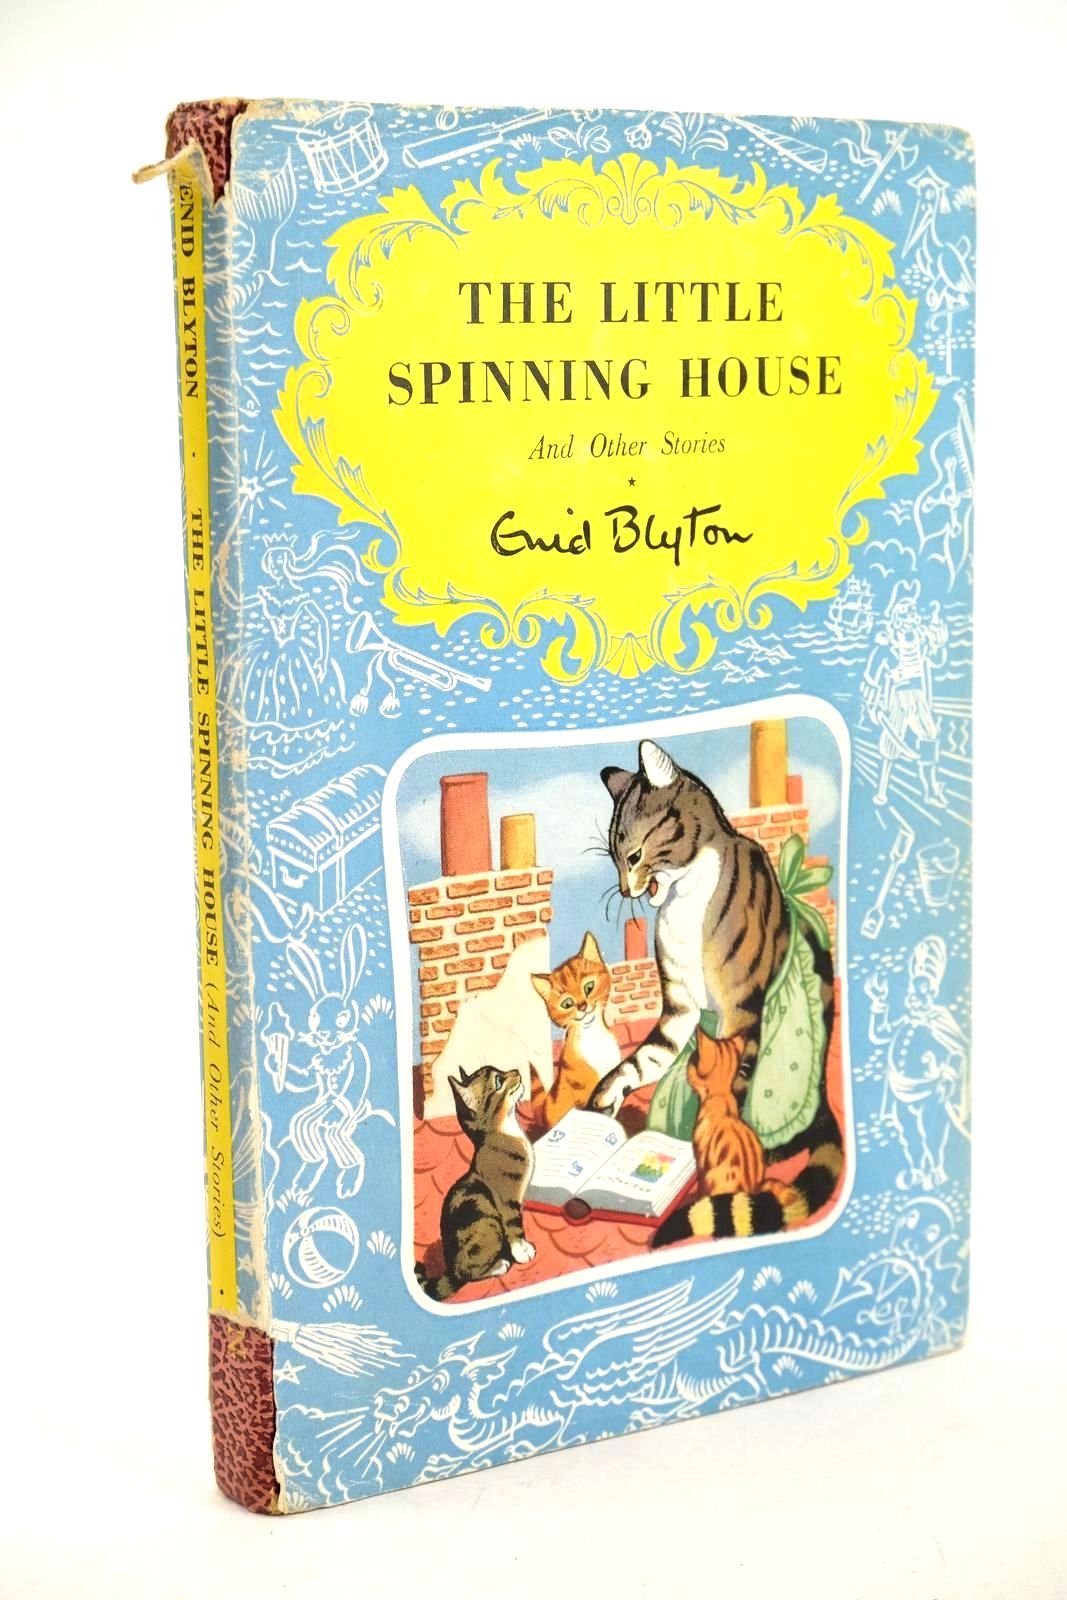 Photo of THE LITTLE SPINNING HOUSE AND OTHER STORIES written by Blyton, Enid published by H.A. and W.L. Pitkin Ltd. (STOCK CODE: 1326785)  for sale by Stella & Rose's Books